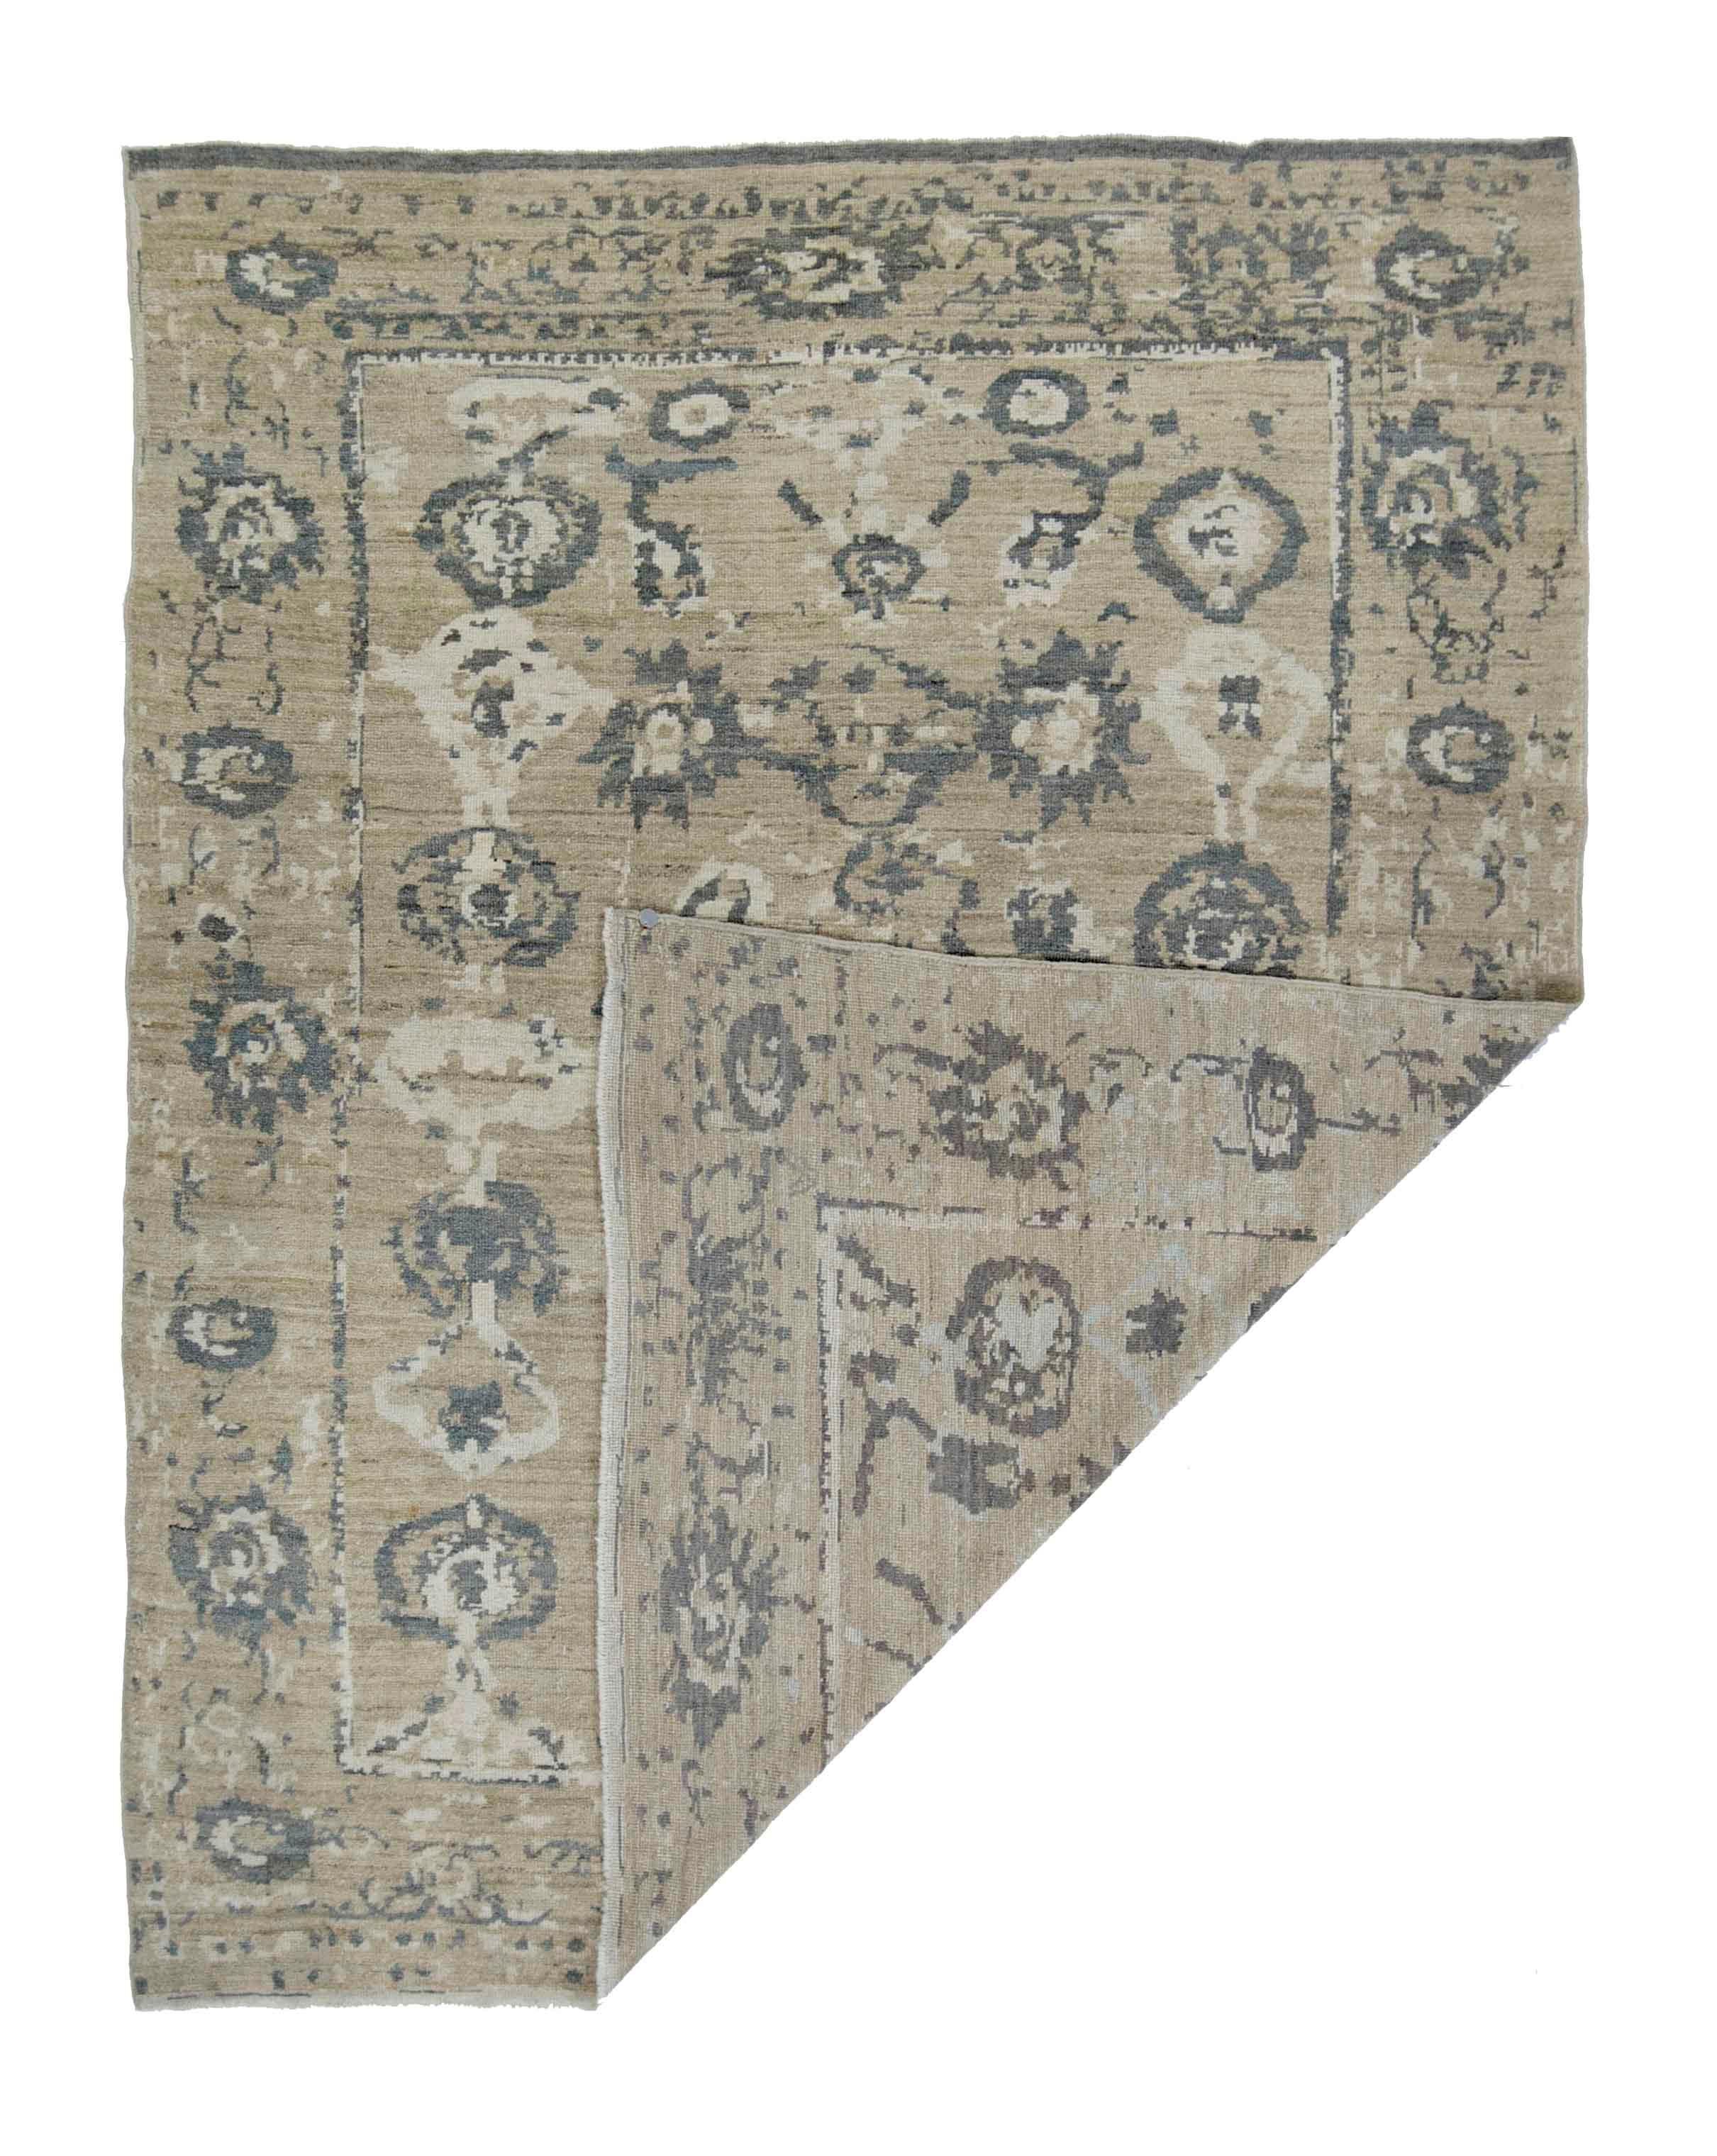 Wool New Turkish Oushak Rug with Gray and White Floral Patterns on Beige Field For Sale